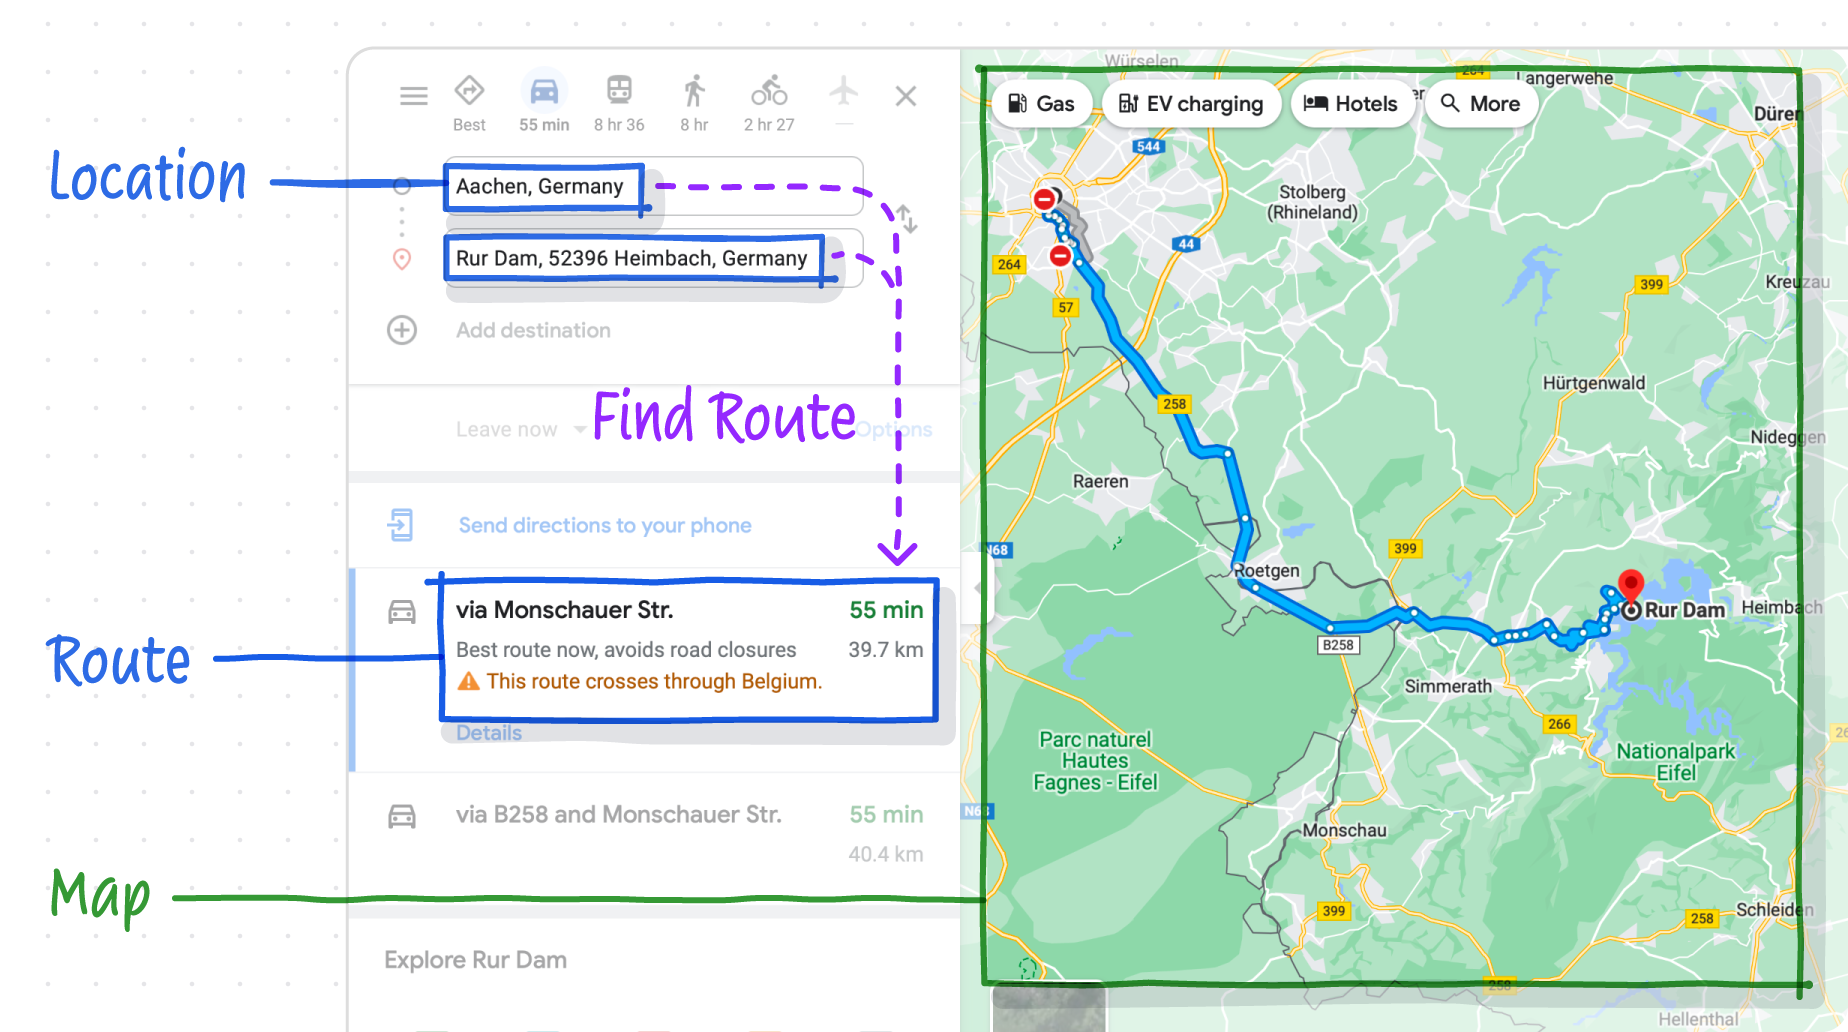 A mapping app consists of: structured data types (Location and Route), computations (Find Route) and views (Map).